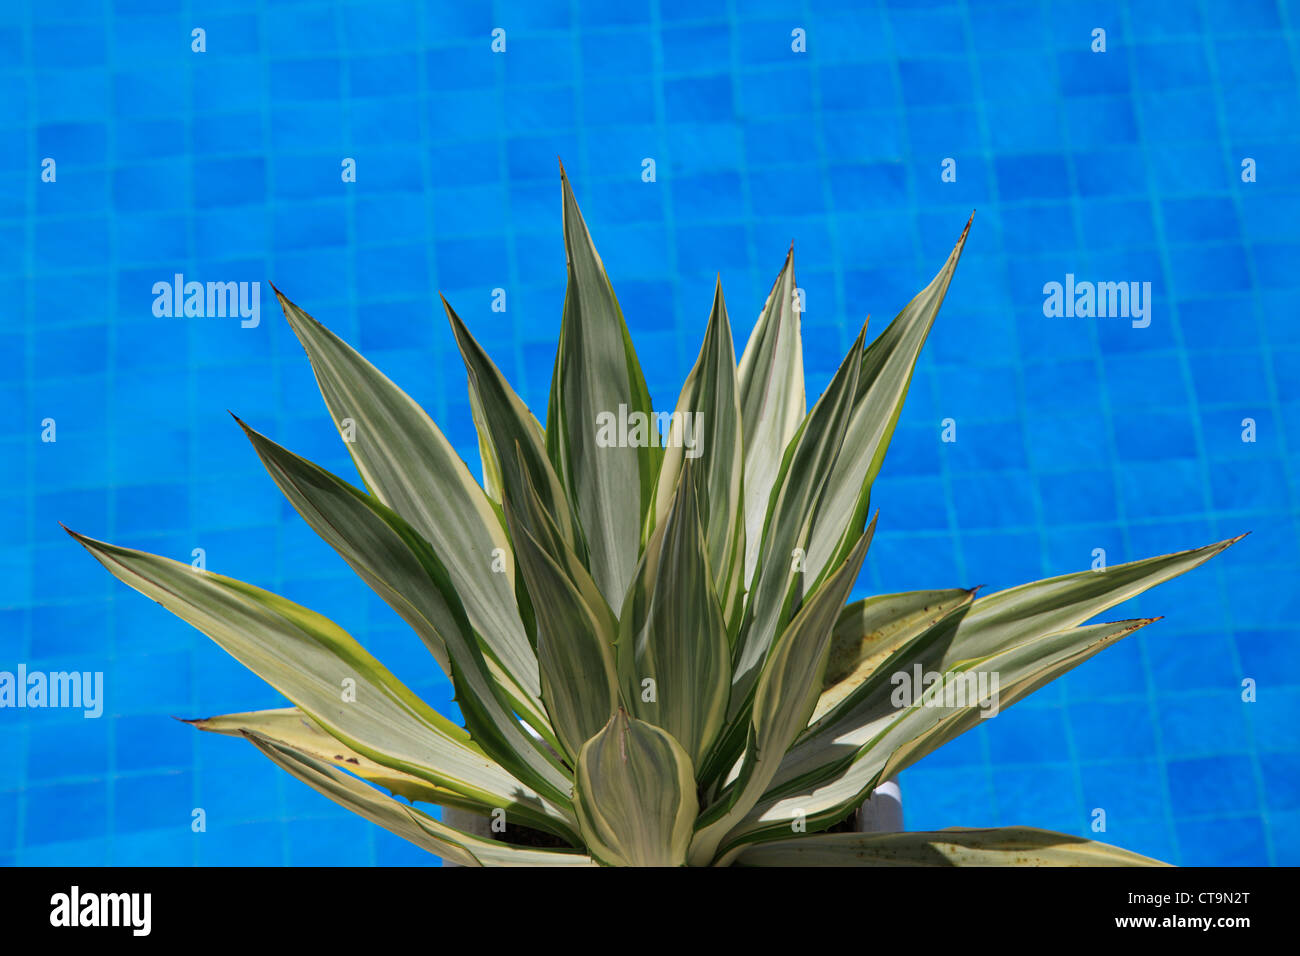 Cactus leaves next to the bright blue water of a swimming pool in the Seychelles Stock Photo